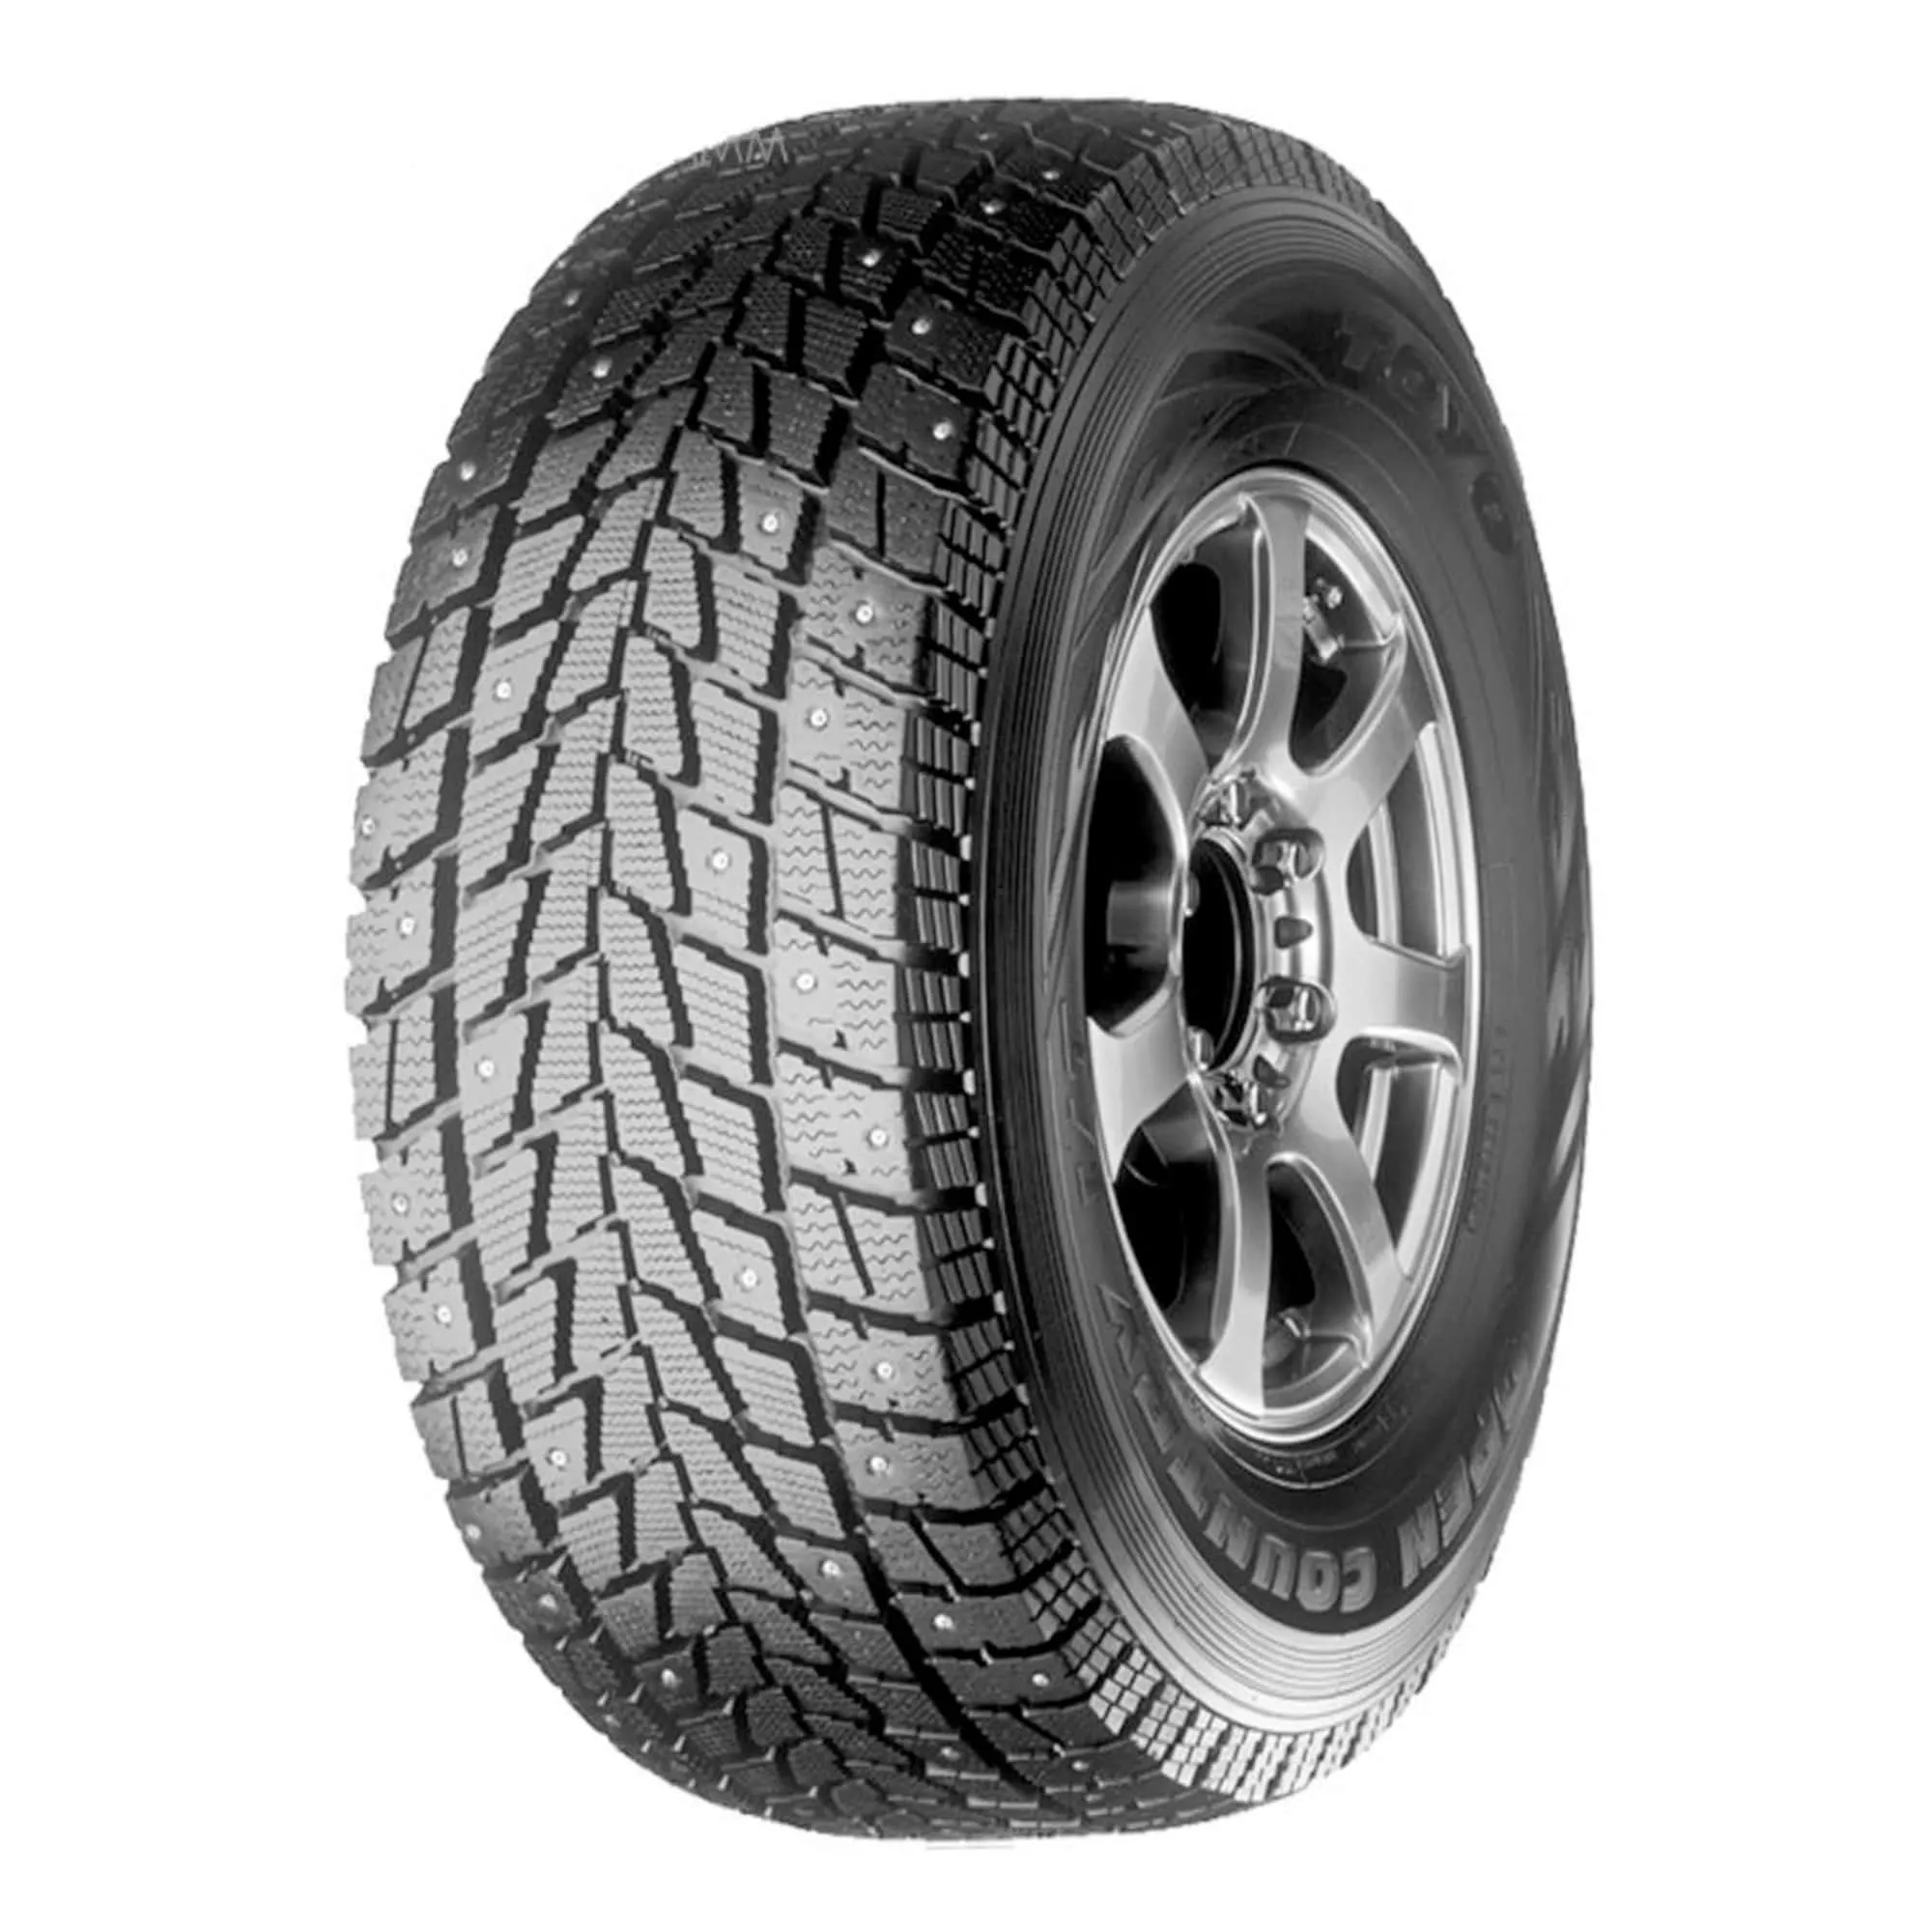 Шина 275/60R20 115T OPEN COUNTRY I/T